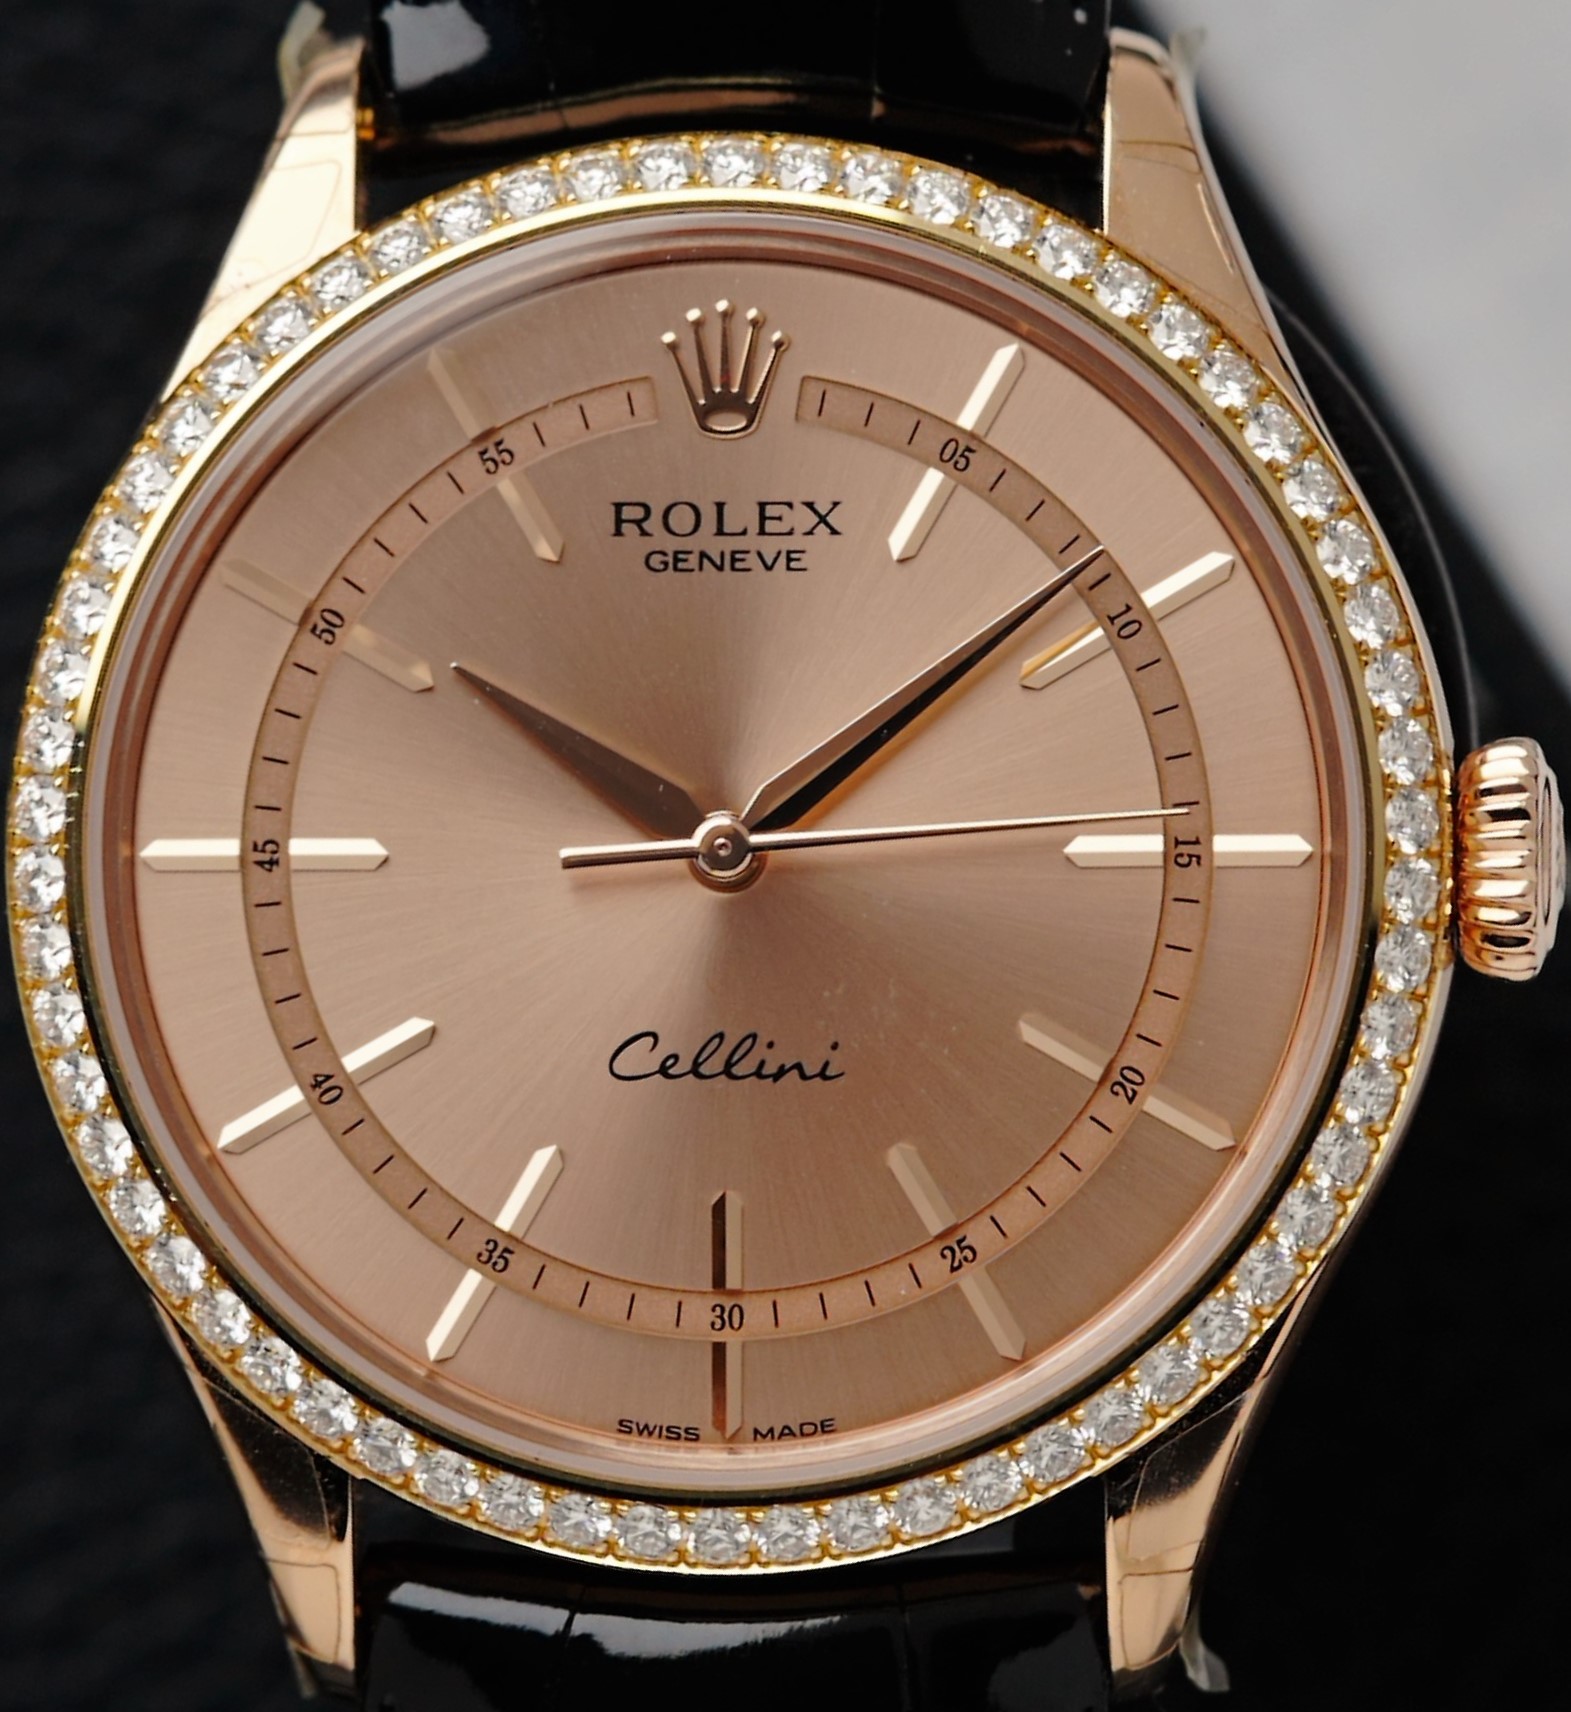 Rolex Cellini Time Salmon Rose Gold watch featured under white lighting.